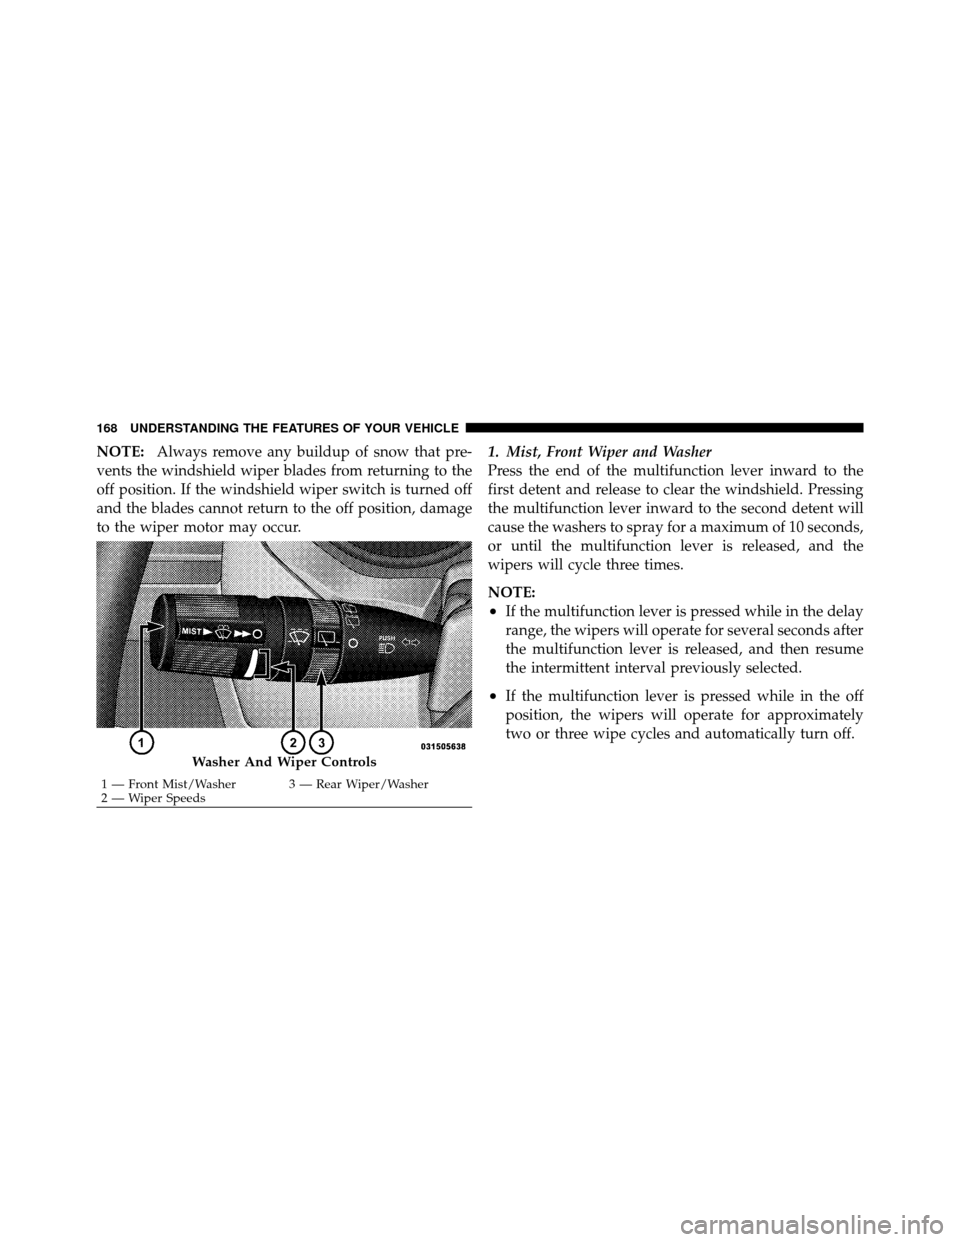 CHRYSLER TOWN AND COUNTRY 2010 5.G Owners Manual NOTE:Always remove any buildup of snow that pre-
vents the windshield wiper blades from returning to the
off position. If the windshield wiper switch is turned off
and the blades cannot return to the 